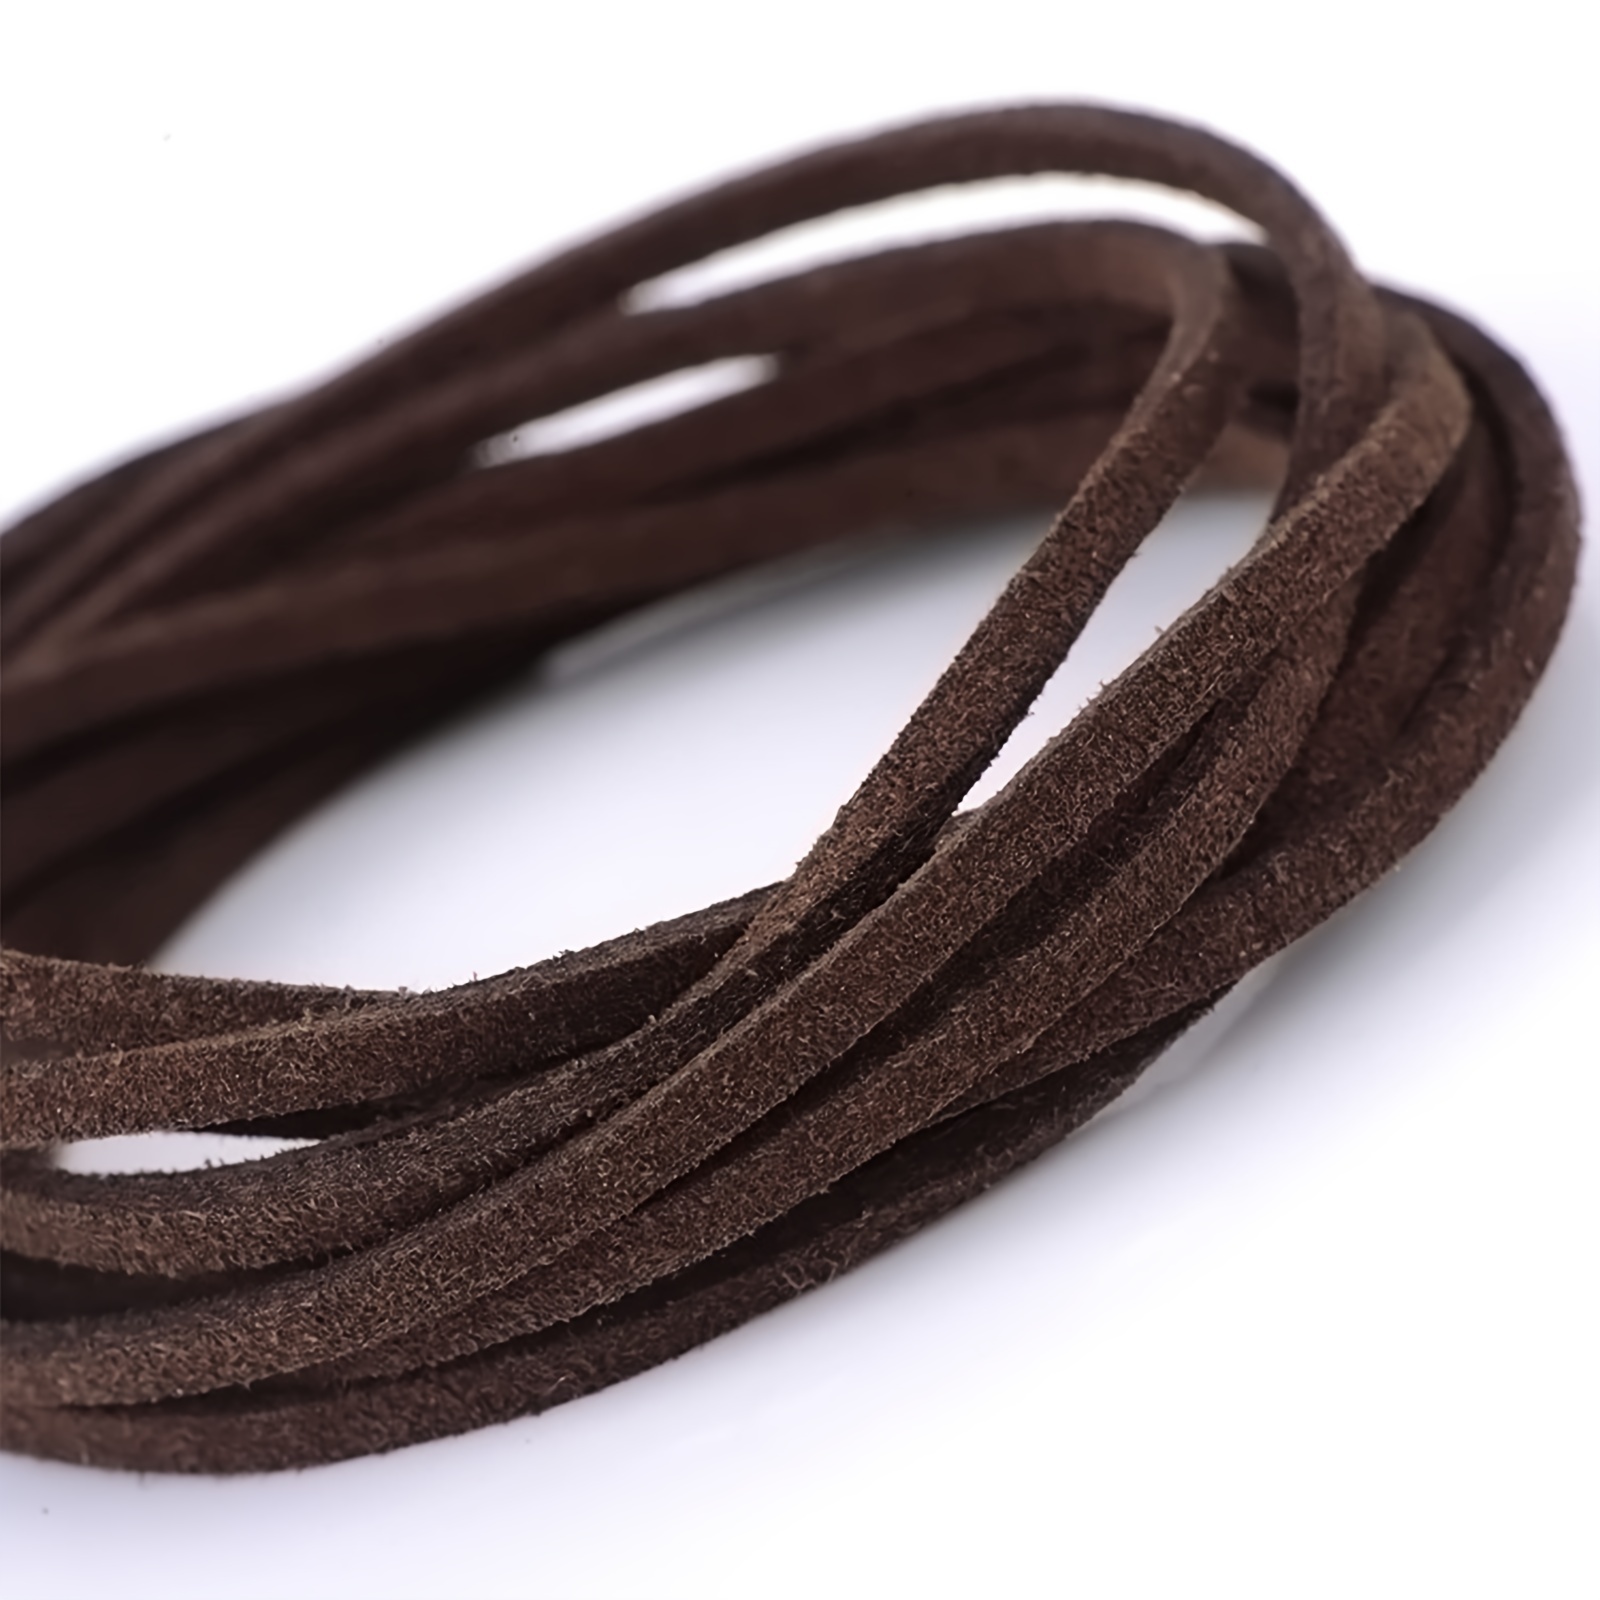 Suede Leather Cord / Leather Straps / Faux Leather Strip / Leather